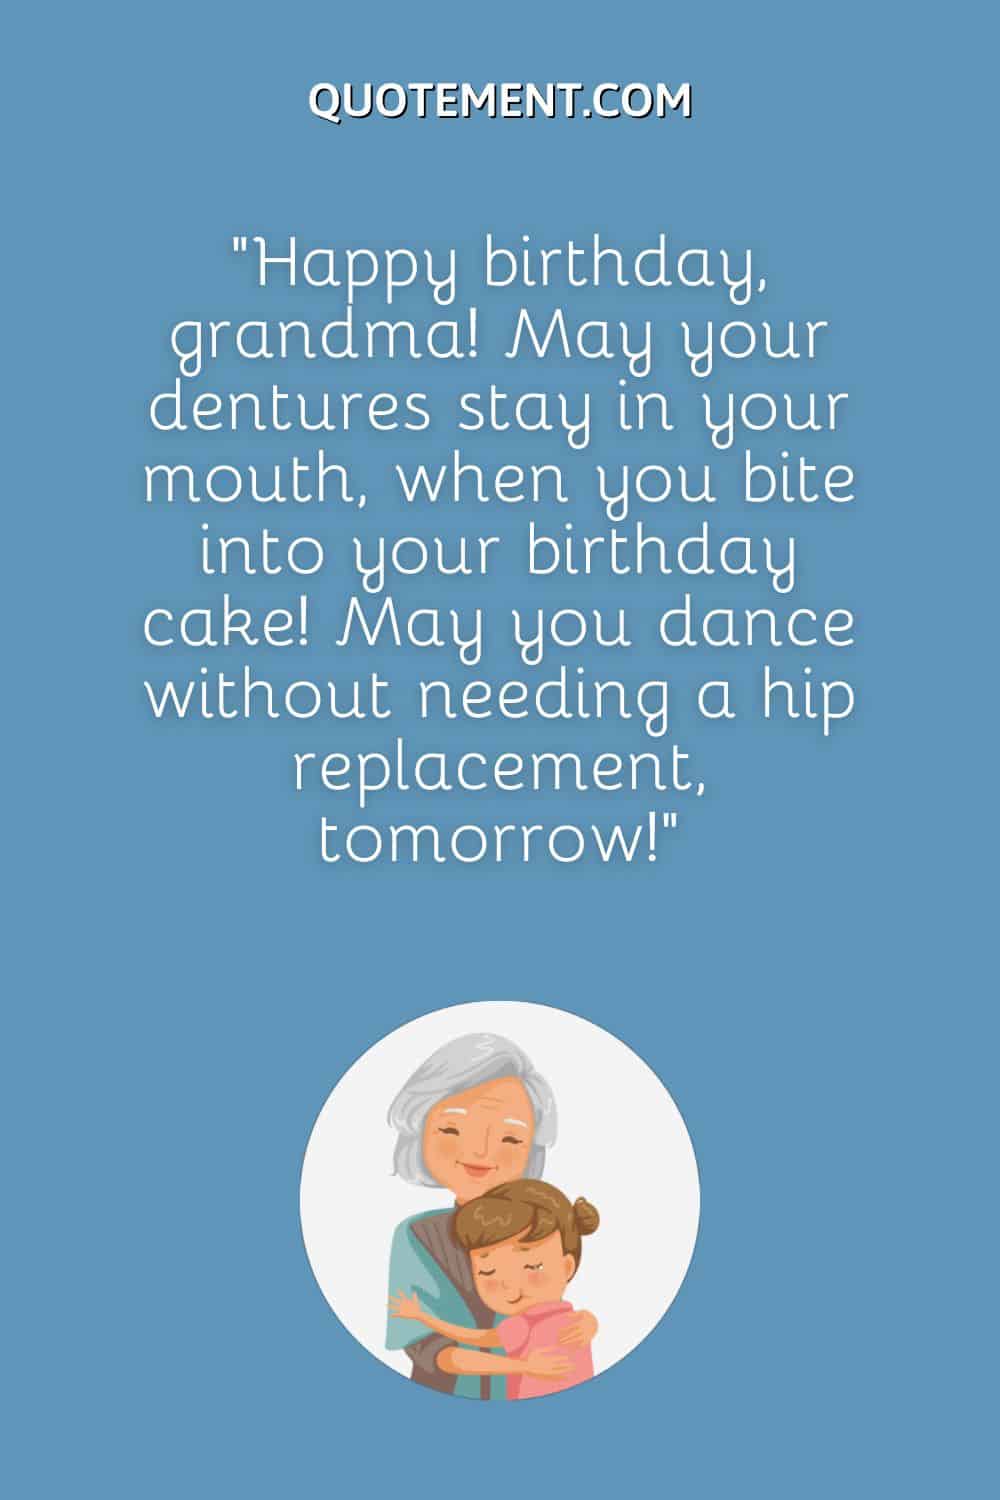 May your dentures stay in your mouth, when you bite into your birthday cake